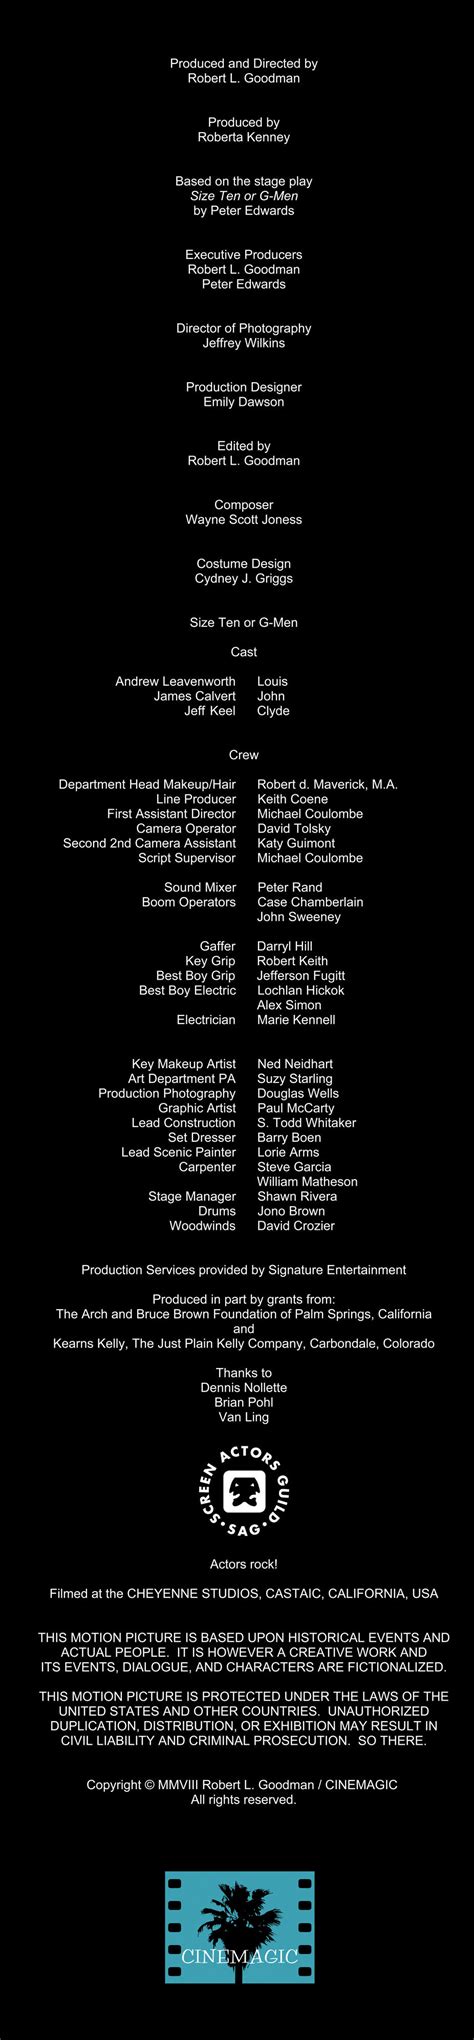 Pink Bedroom (Android) software credits, cast, crew of song